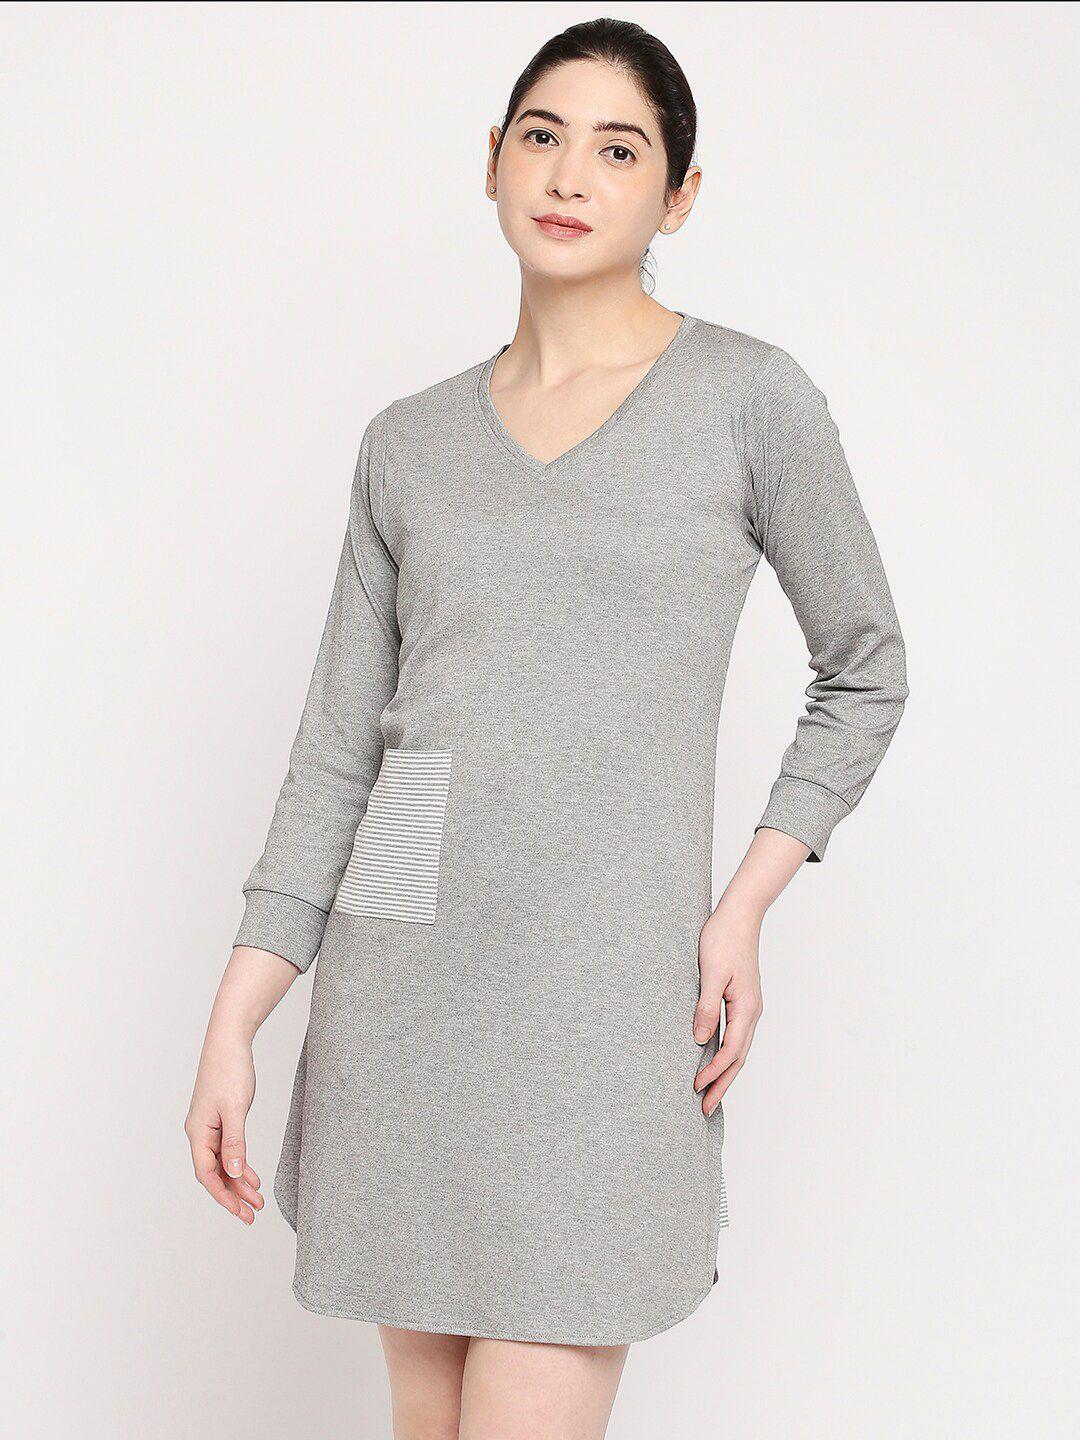 autumn hues grey solid a-line dress with patch pocket